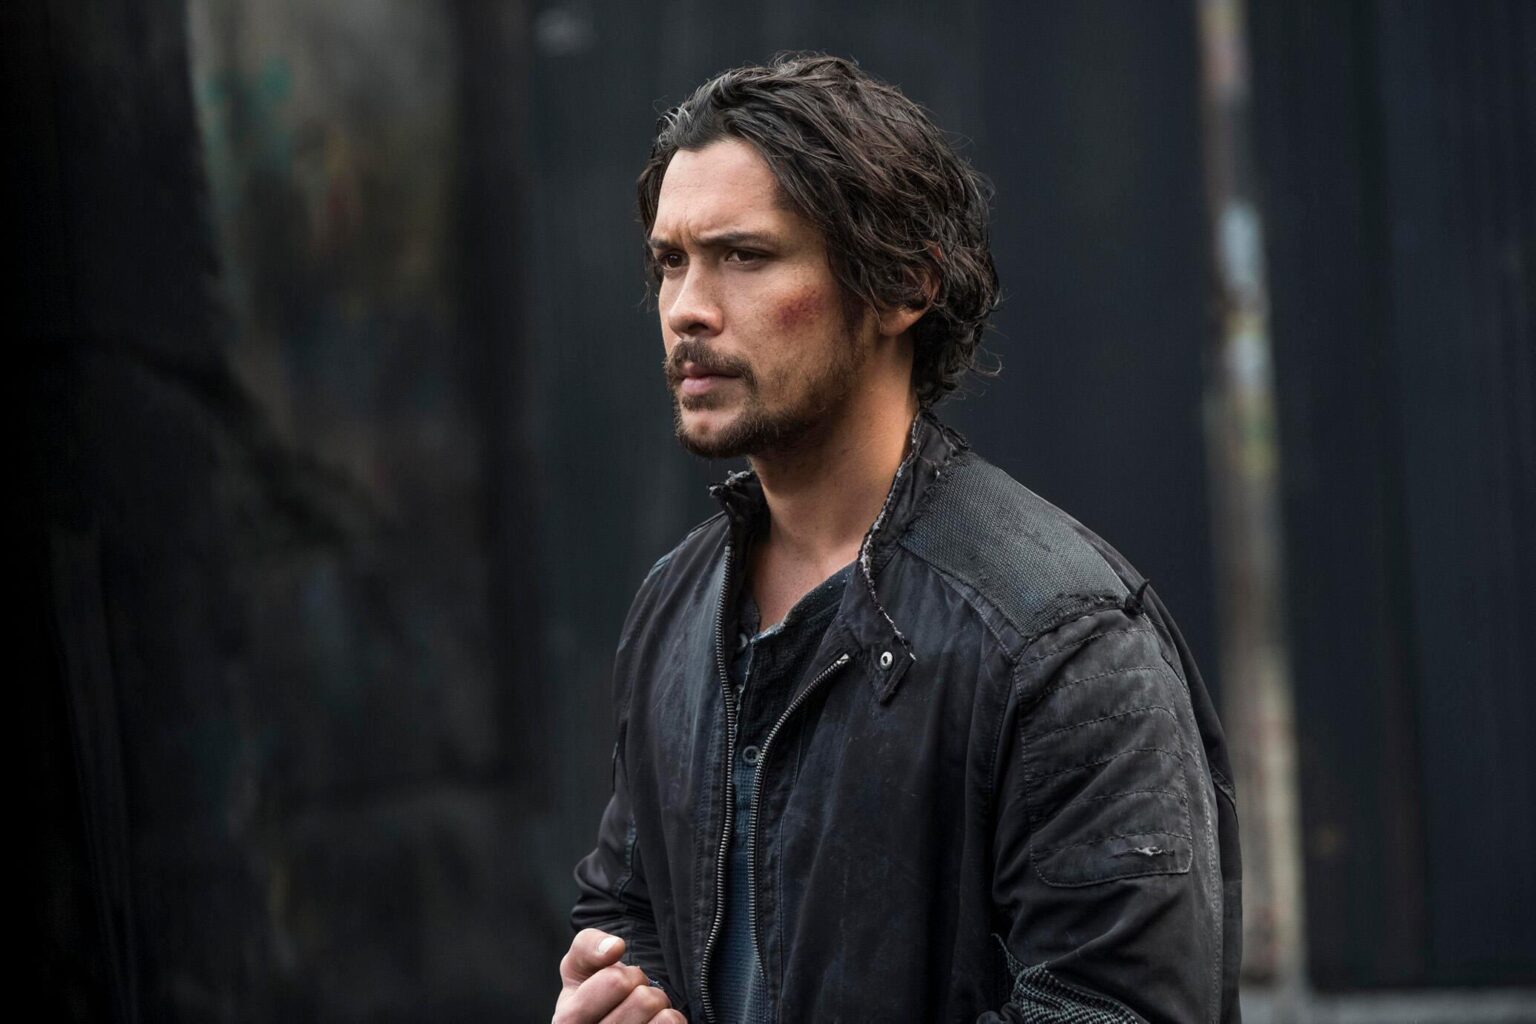 Did you think Bellamy's exit from 'The 100' was terrible? We did too! Here are the reasons why we feel our favorite character deserved a better farewell.